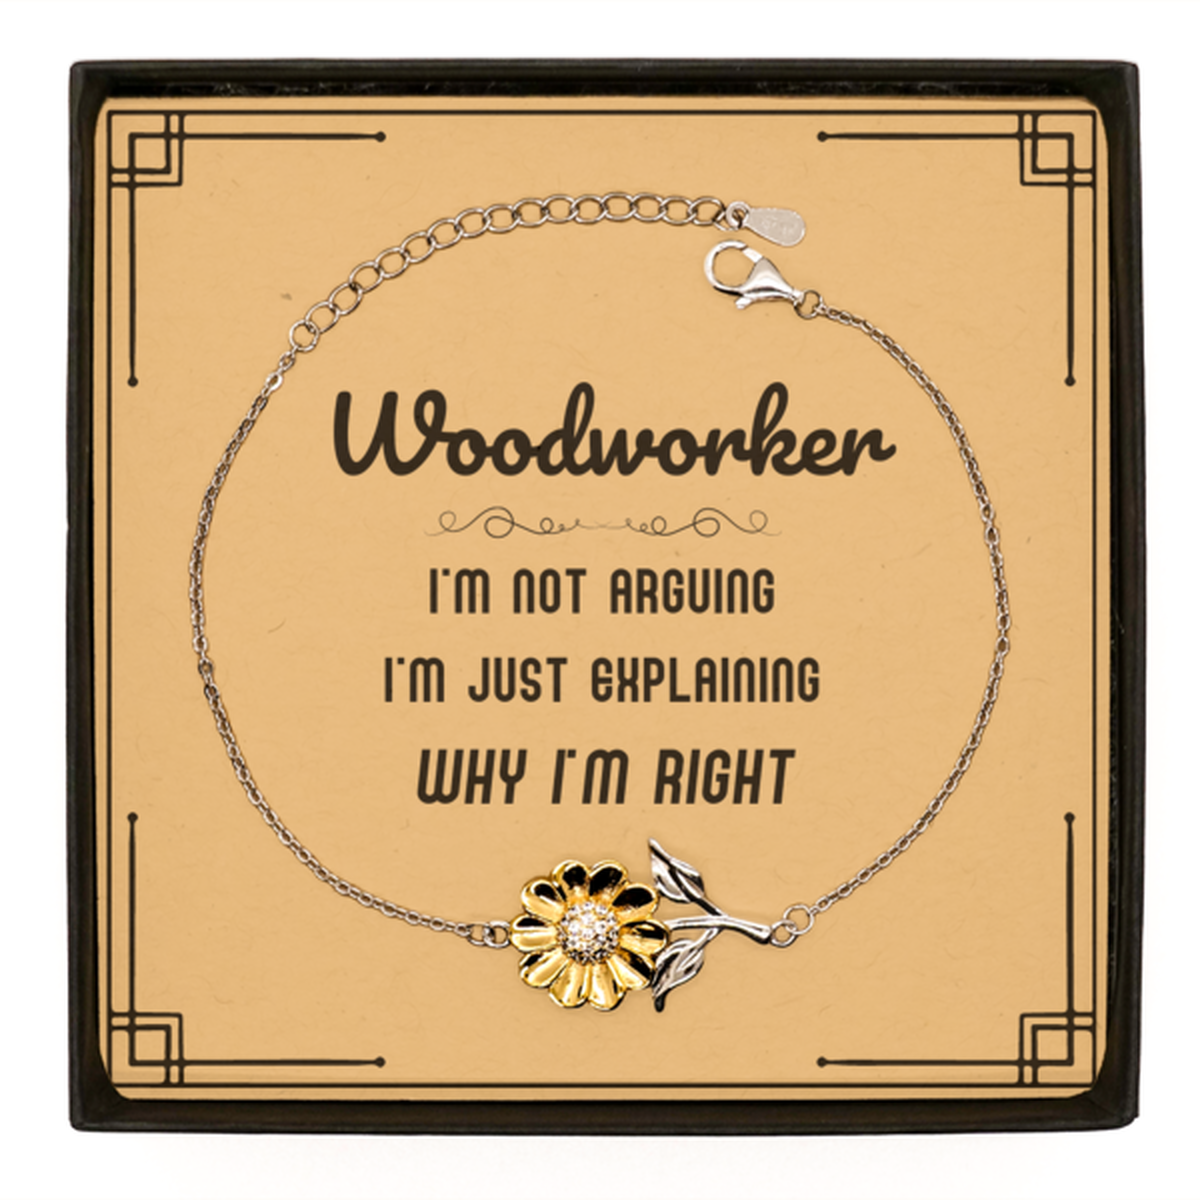 Woodworker I'm not Arguing. I'm Just Explaining Why I'm RIGHT Sunflower Bracelet, Funny Saying Quote Woodworker Gifts For Woodworker Message Card Graduation Birthday Christmas Gifts for Men Women Coworker